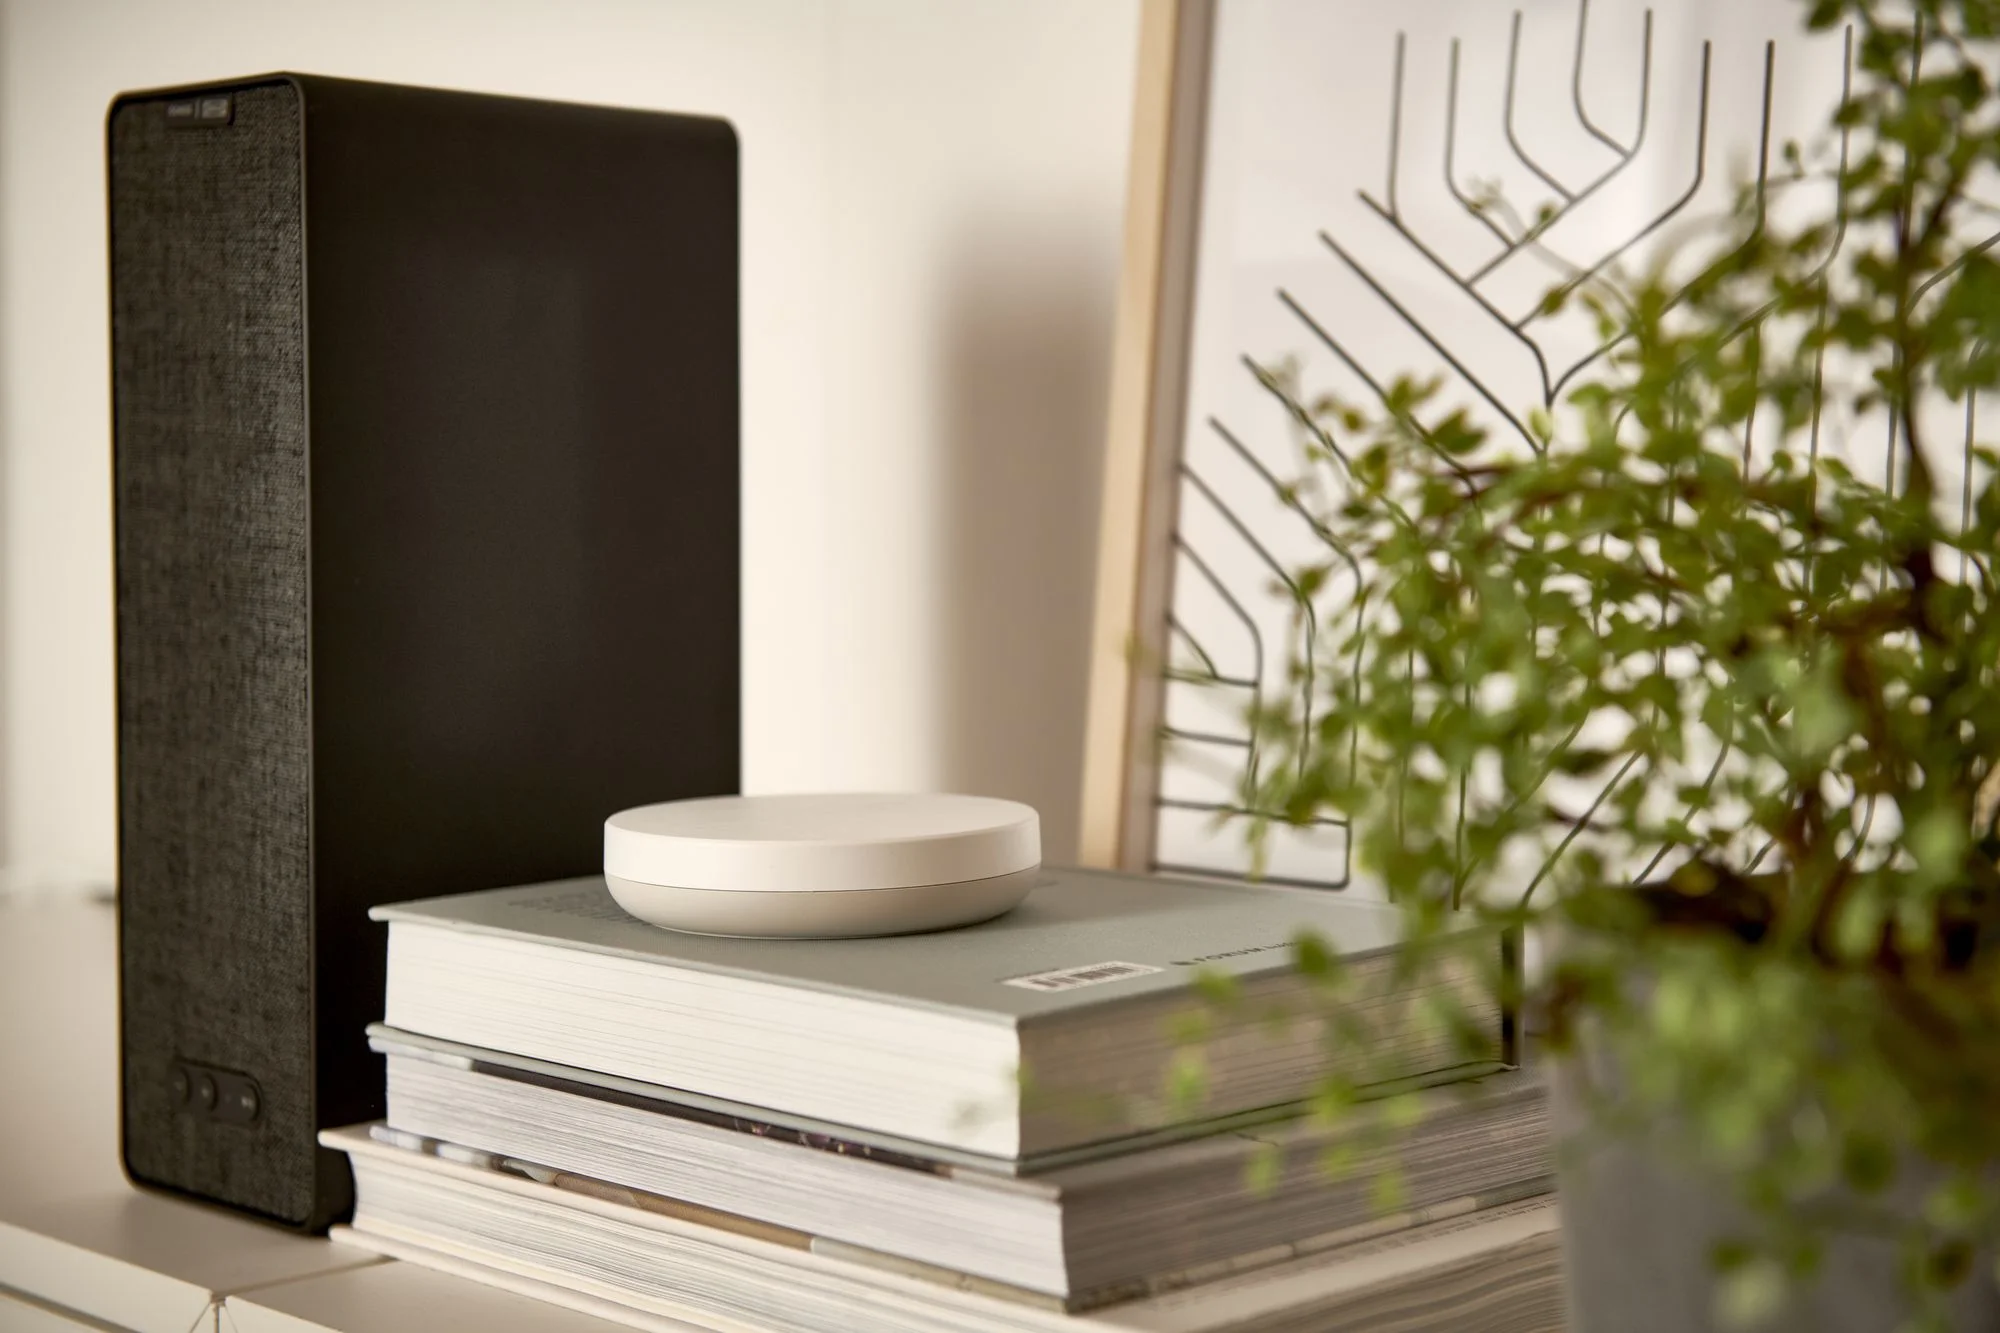 IKEA announces smart home control device and new Home app